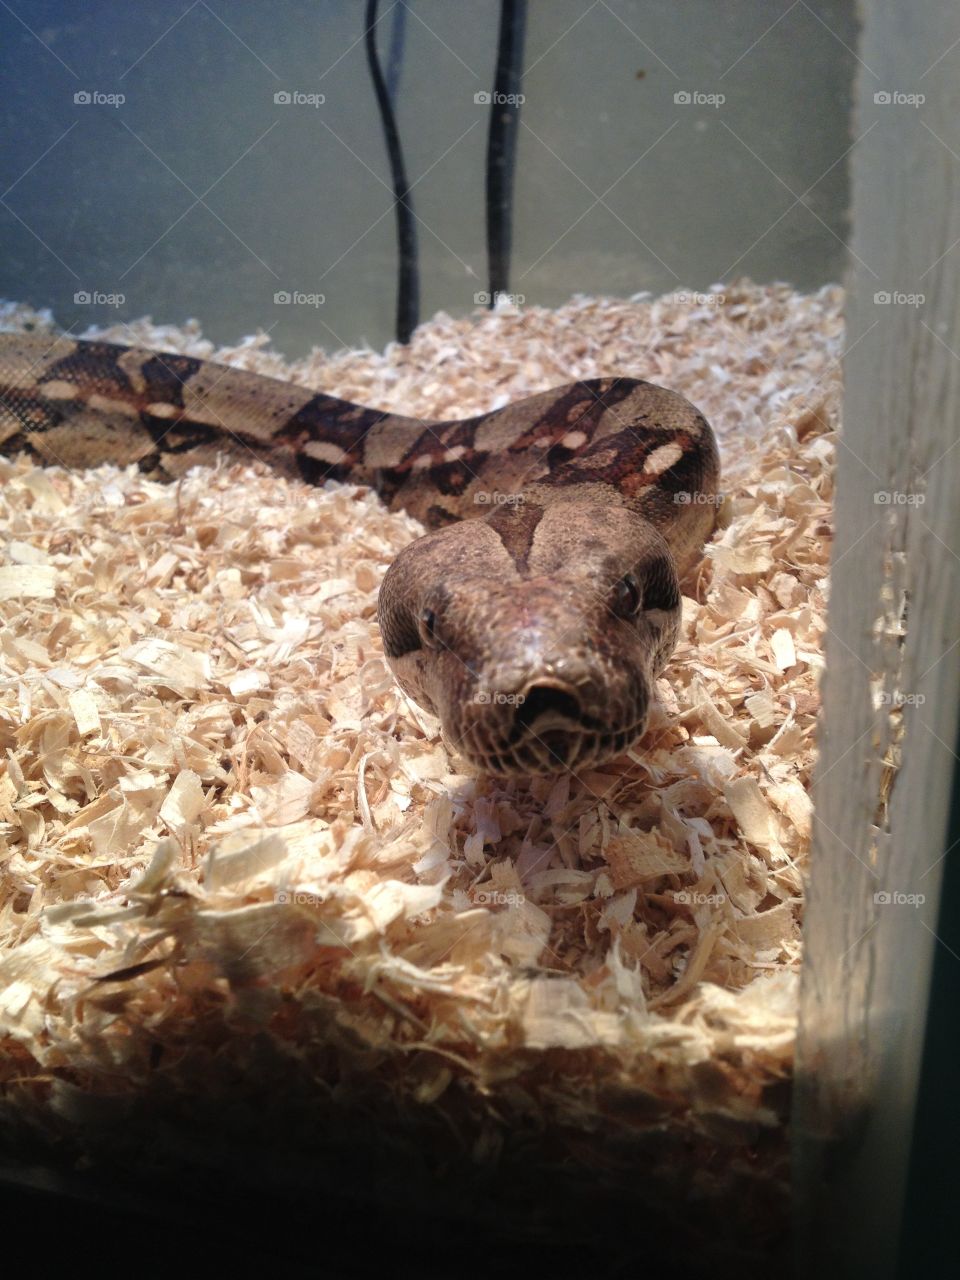 Redtail Boa. A rescue from a pet store.